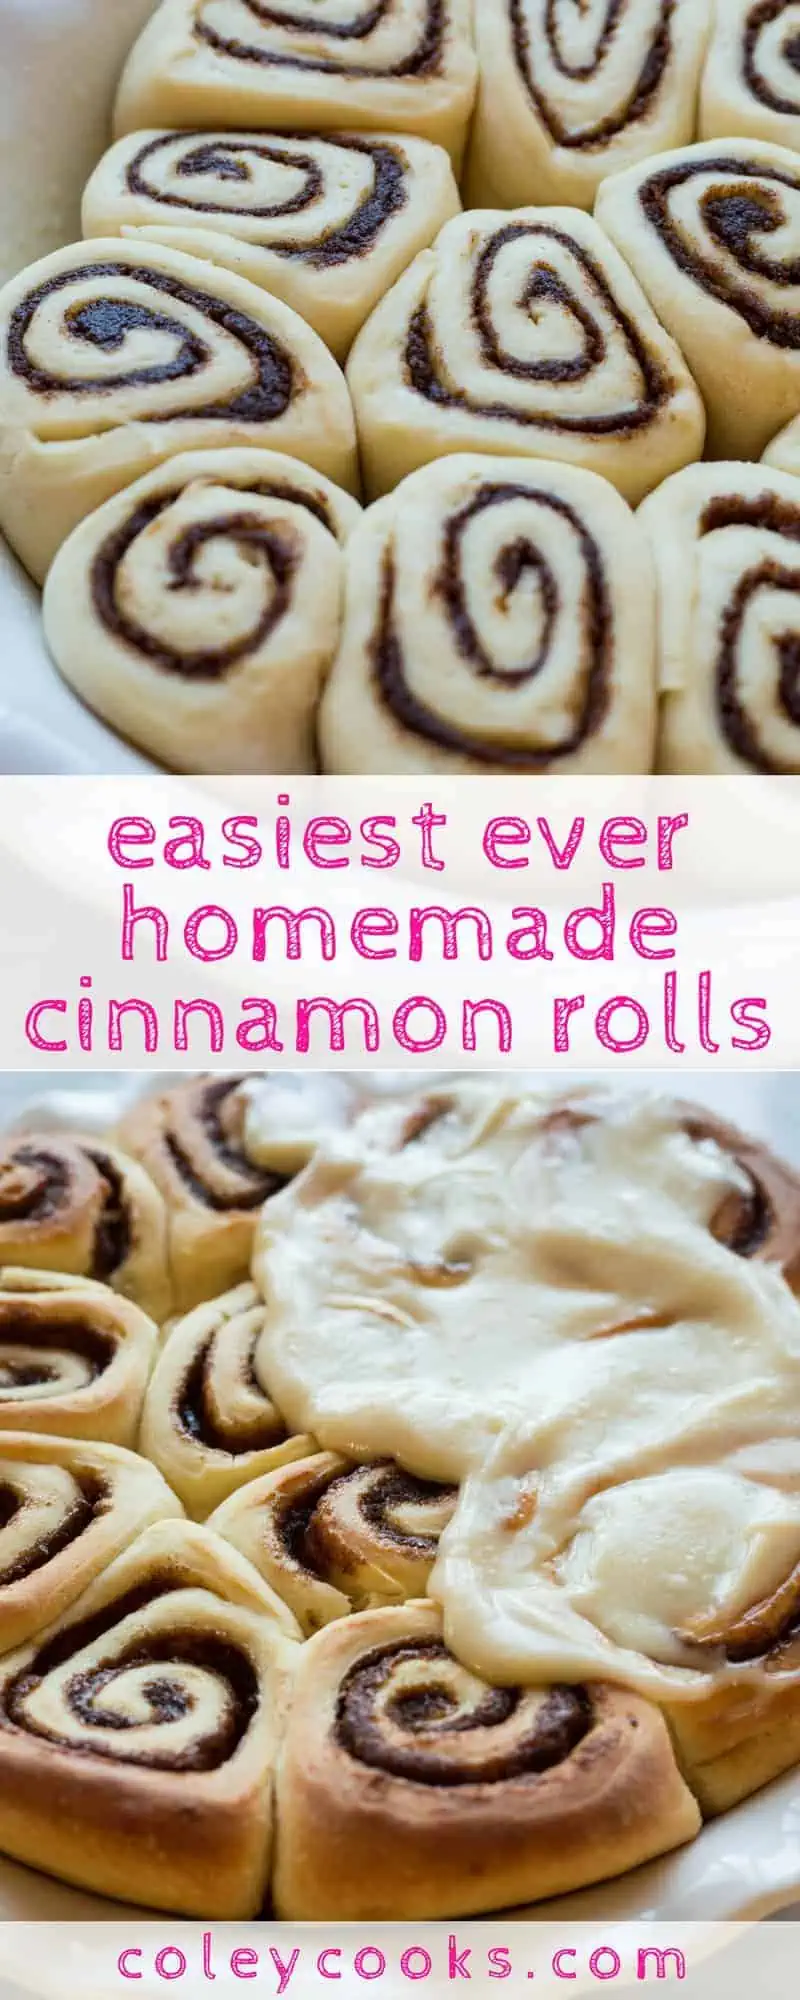 EASY CINNAMON ROLLS | The best easy recipe for homemade yeasted cinnamon buns with cream cheese frosting! This awesome breakfast : brunch recipe is on the table in 2 hours flat! | ColeyCooks.com